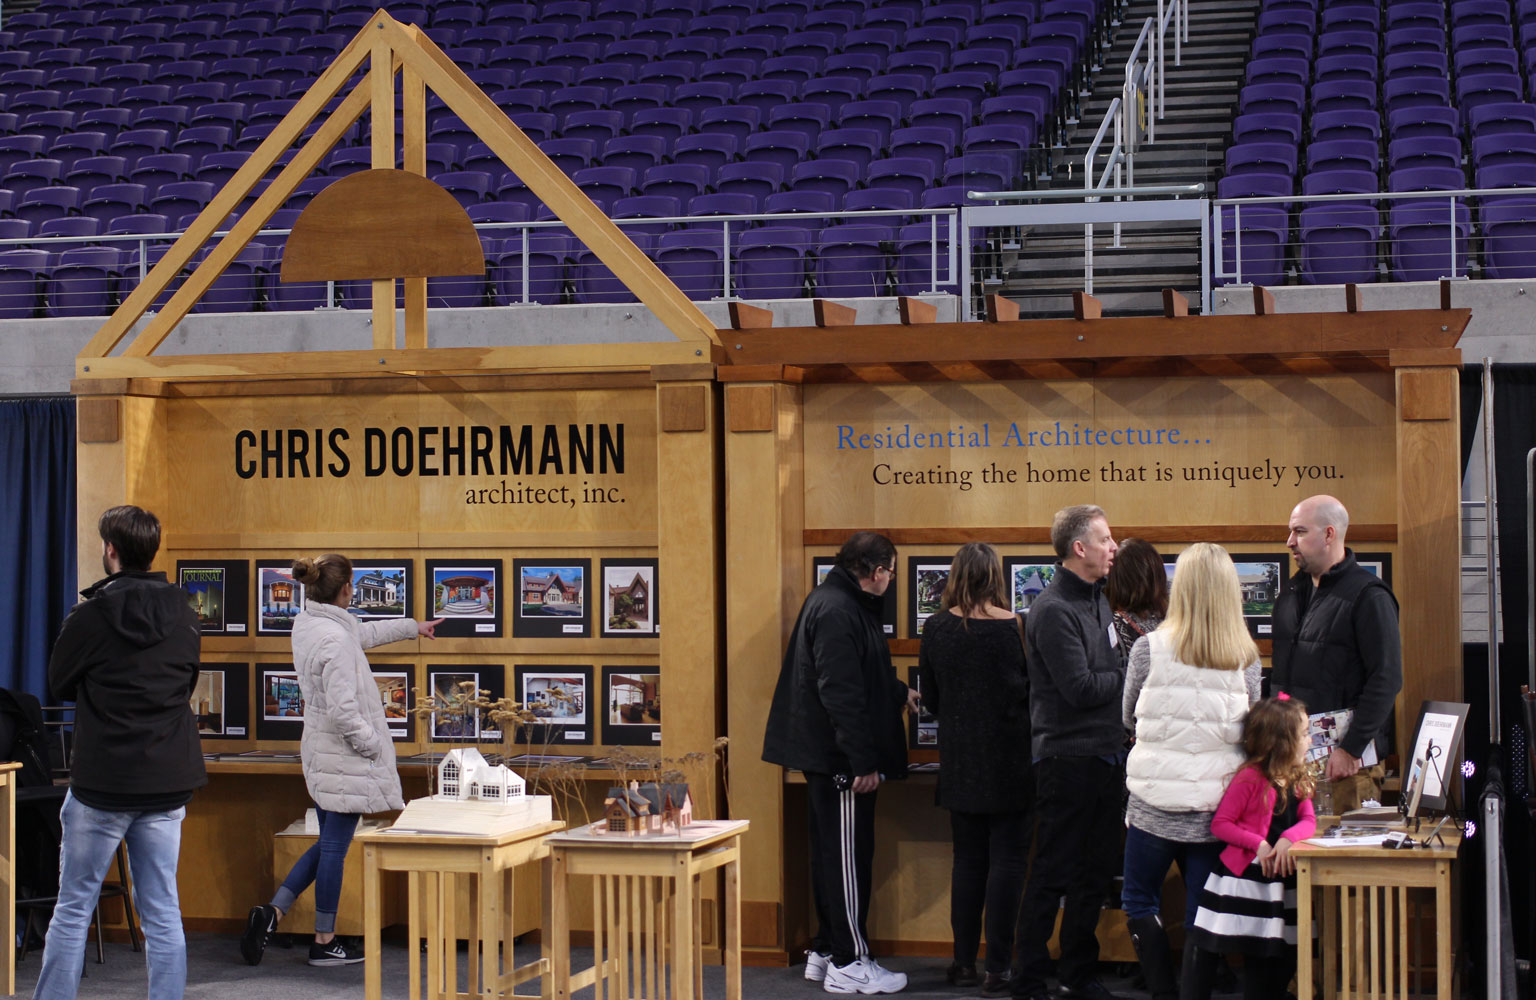 Chris Doehrmann Architect Booth at the Minneapolis Home and Remodeling Show